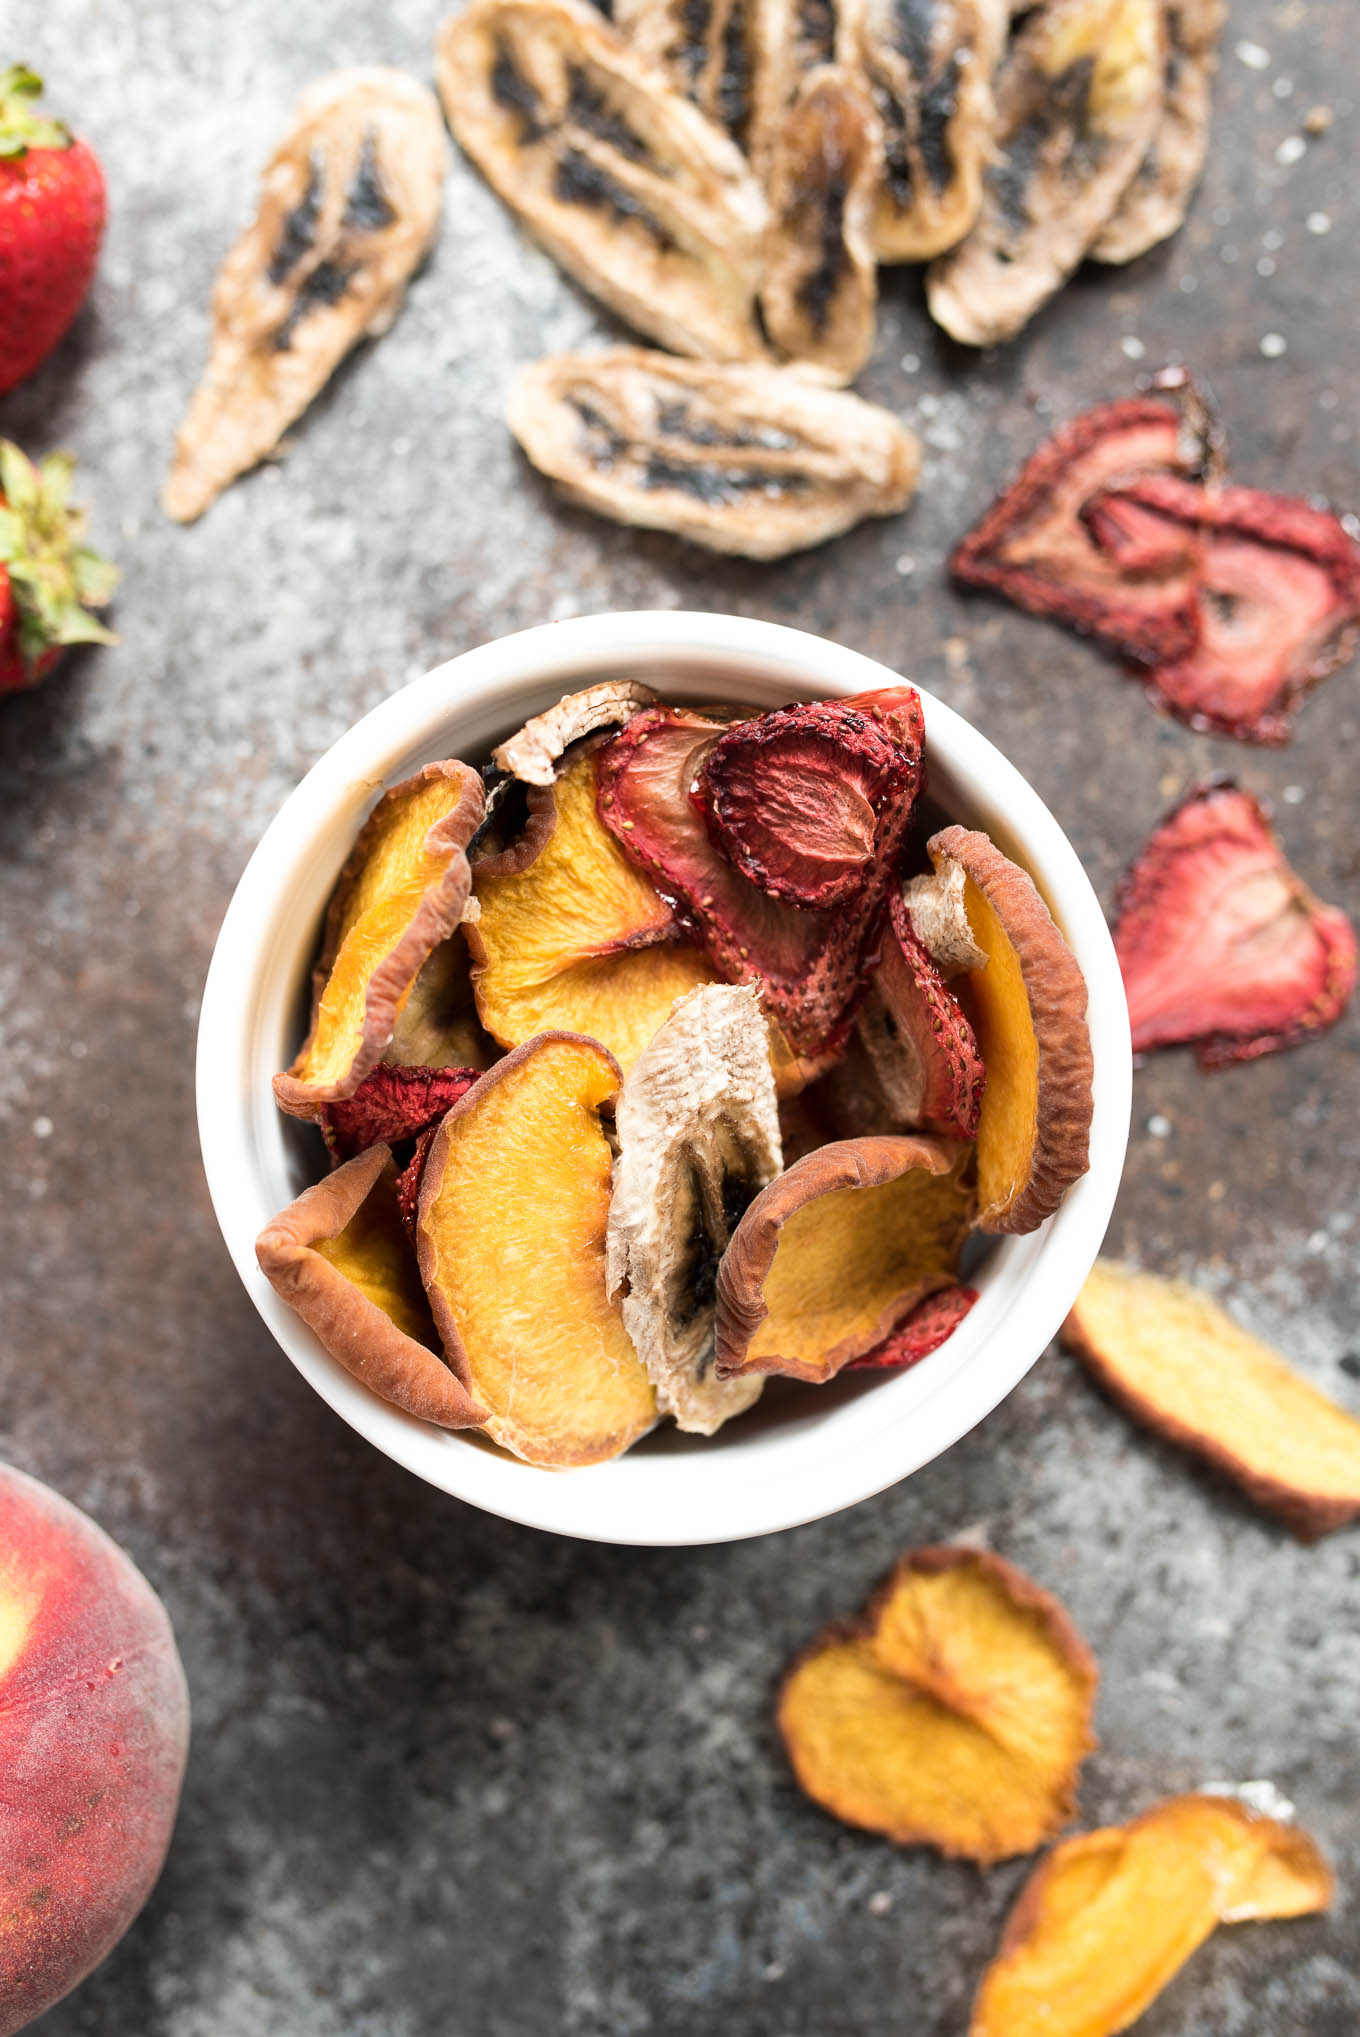 Simple Homemade Dried Fruit- all you need is fresh fruit and a low oven setting to make this no sugar added dried fruit! | www.nutritiouseats.com